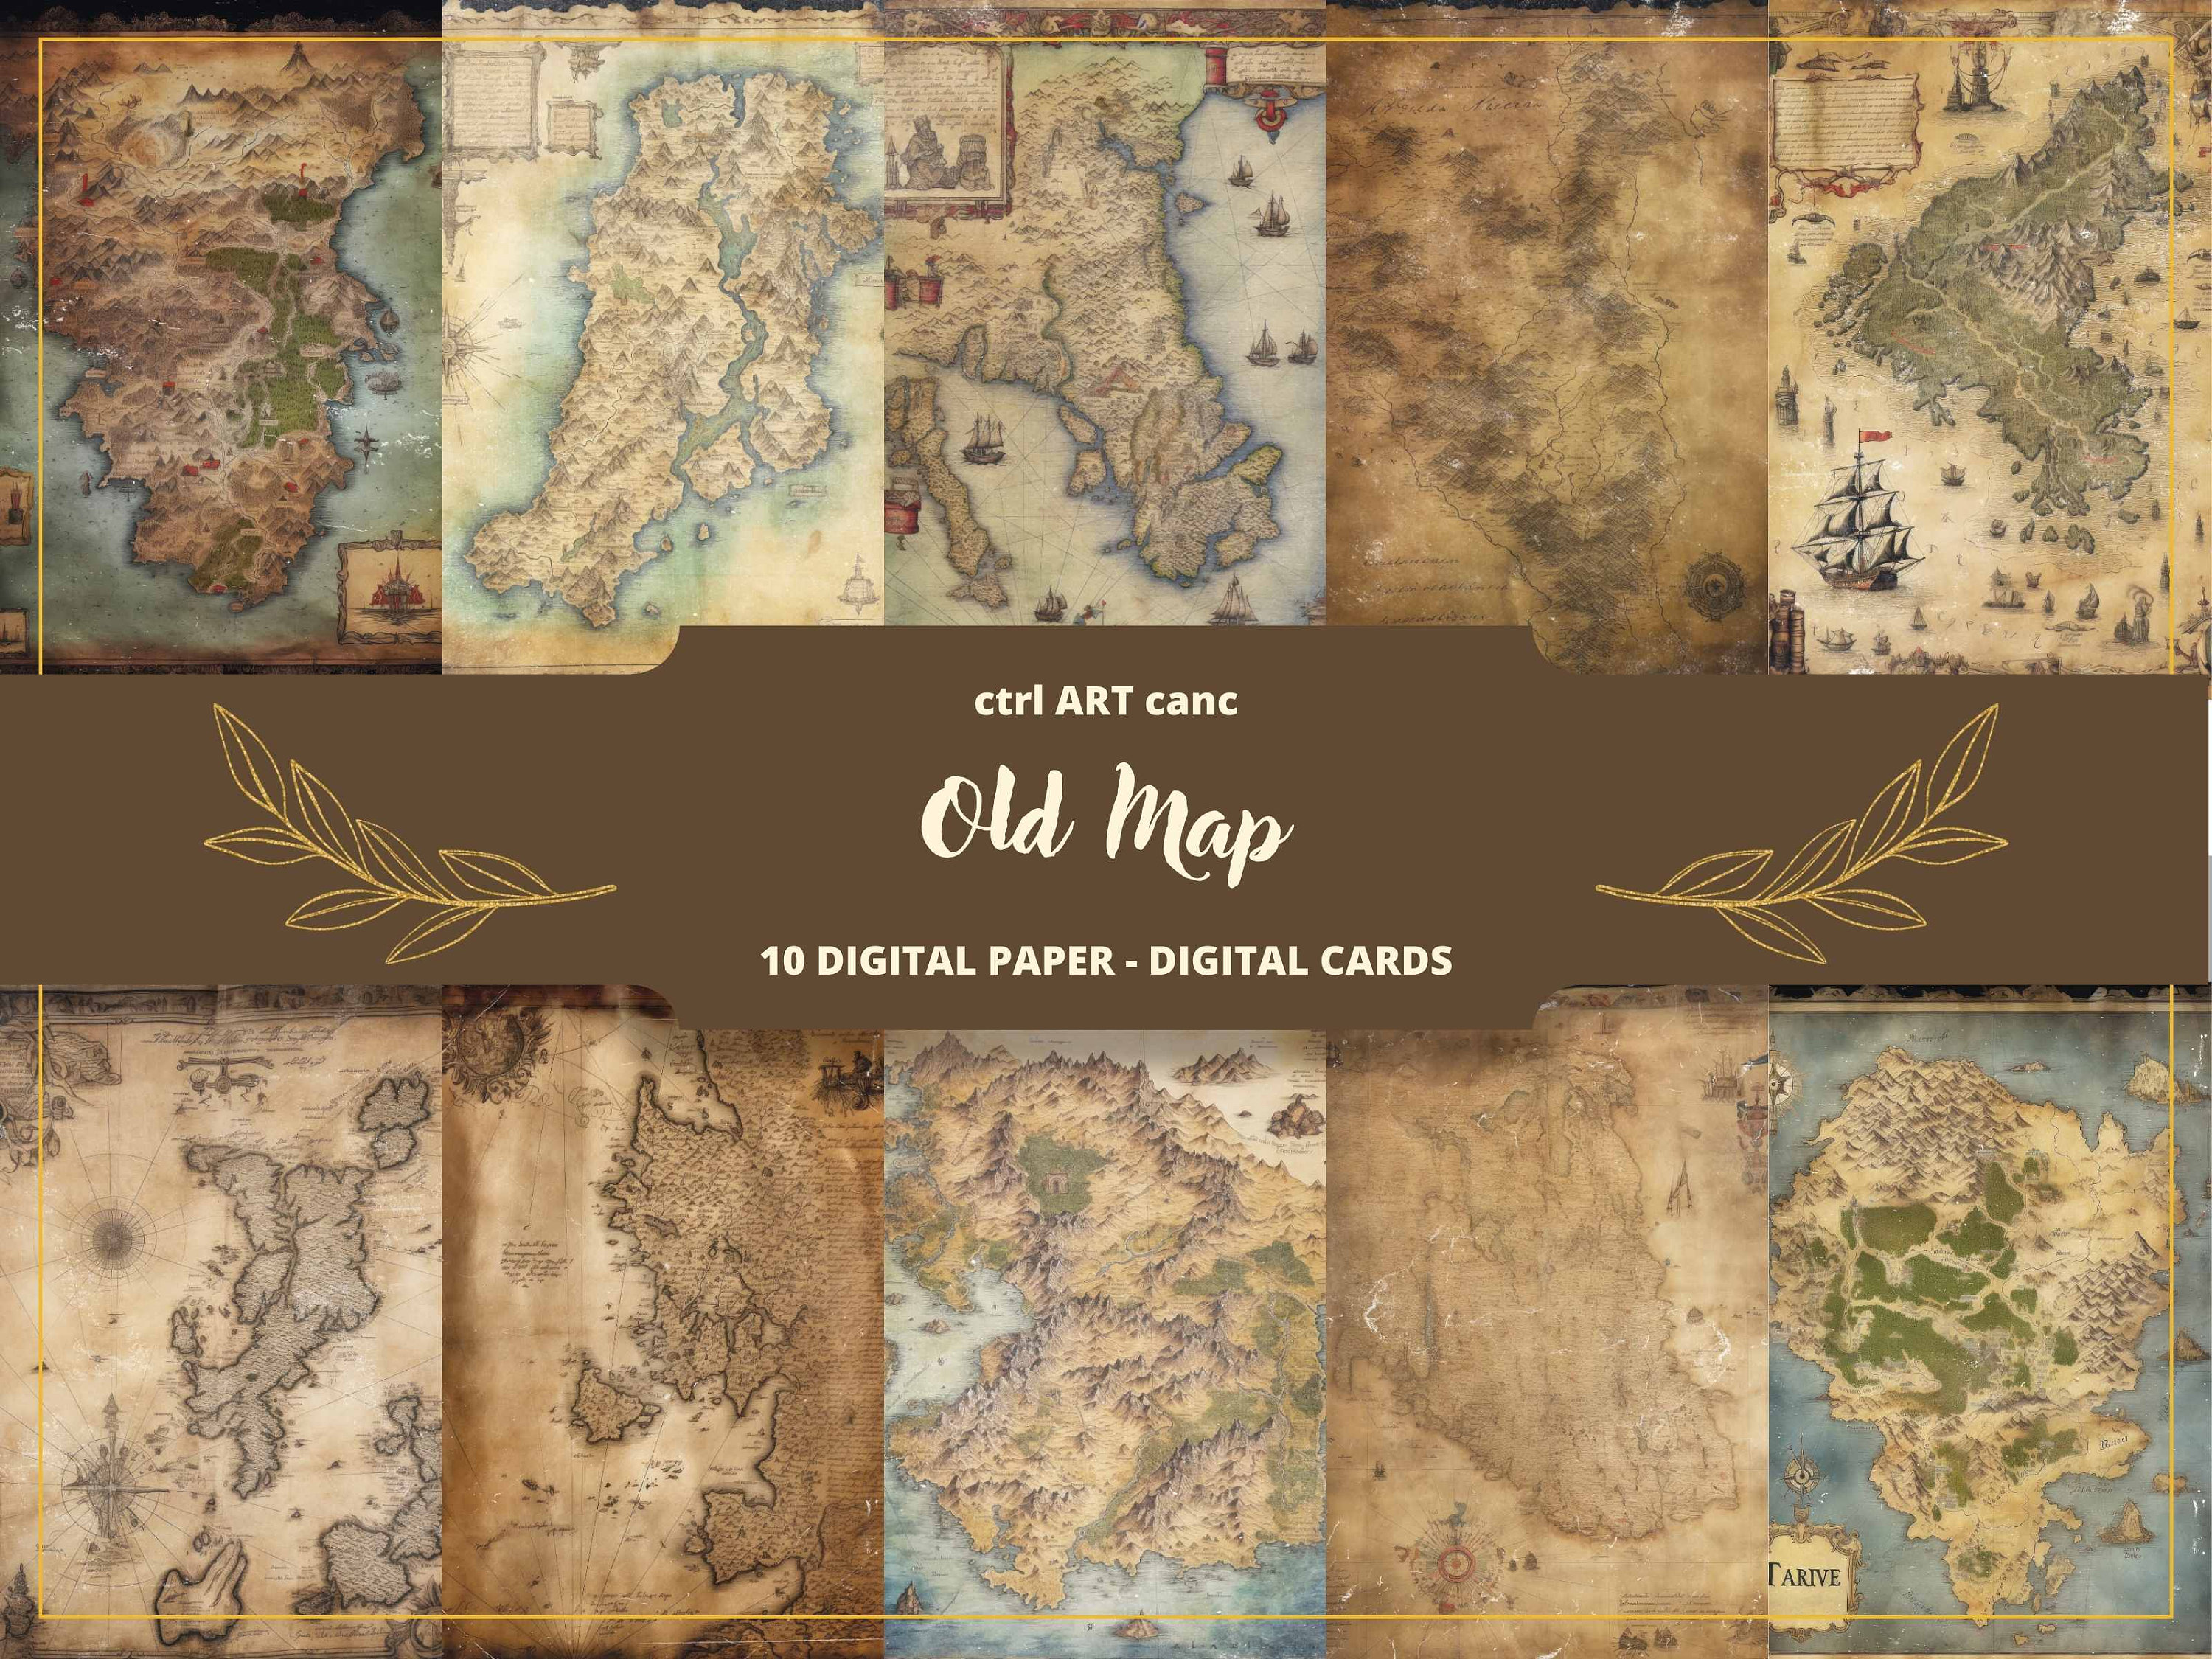 Scrapbook Paper Vintage Maps 8.5x11 20 Double Sided Craft Patterns: Travel  Map Sheets for Papercrafts, Album Scrapbook Cards, Travel Map Sheets for